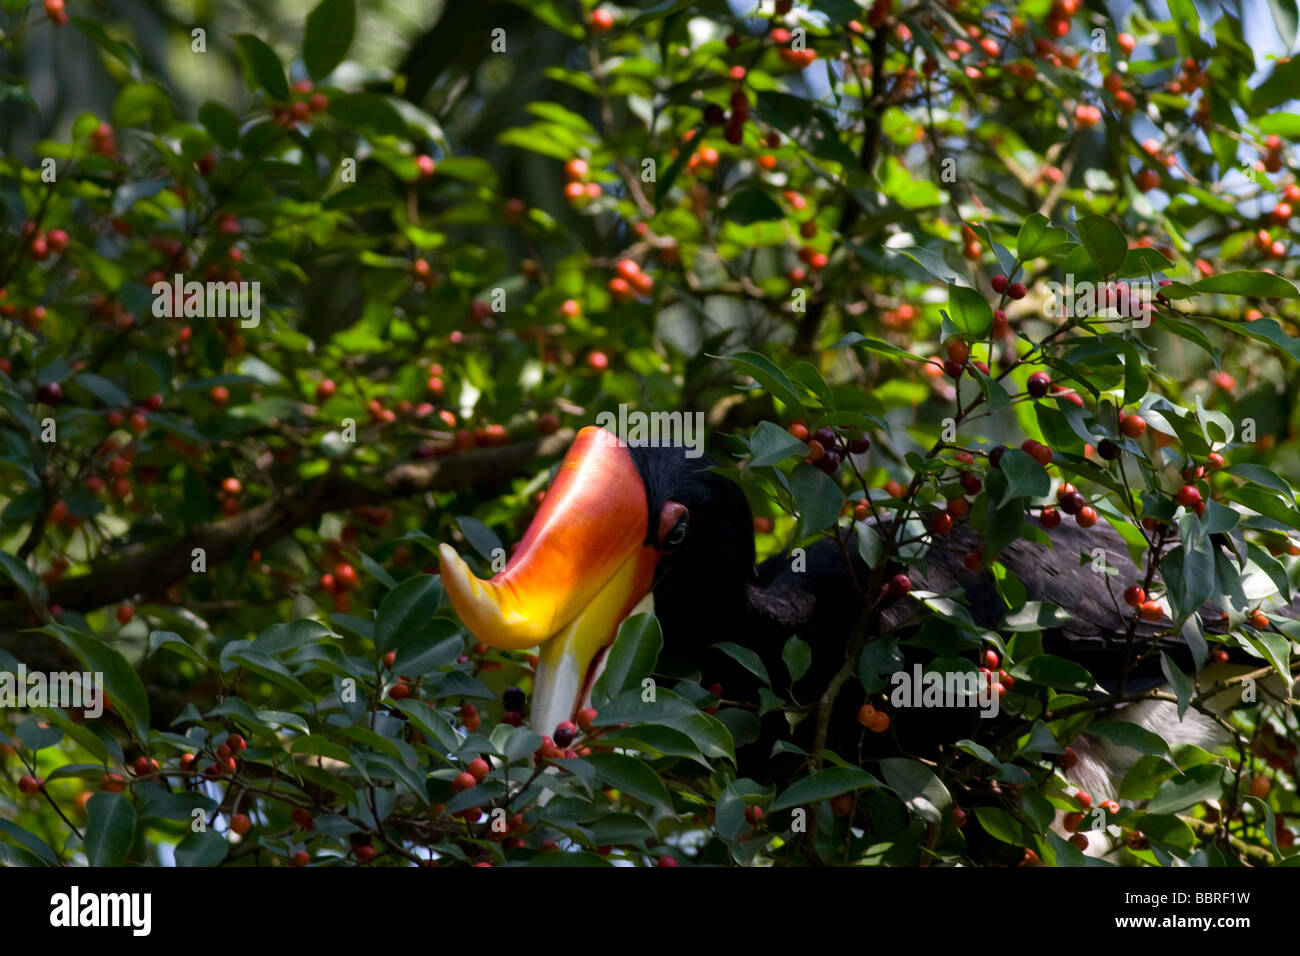 The beautiful and colourful beak seen in Malaysian tropical rainforests This hornbill is eating some local fruits. Stock Photo